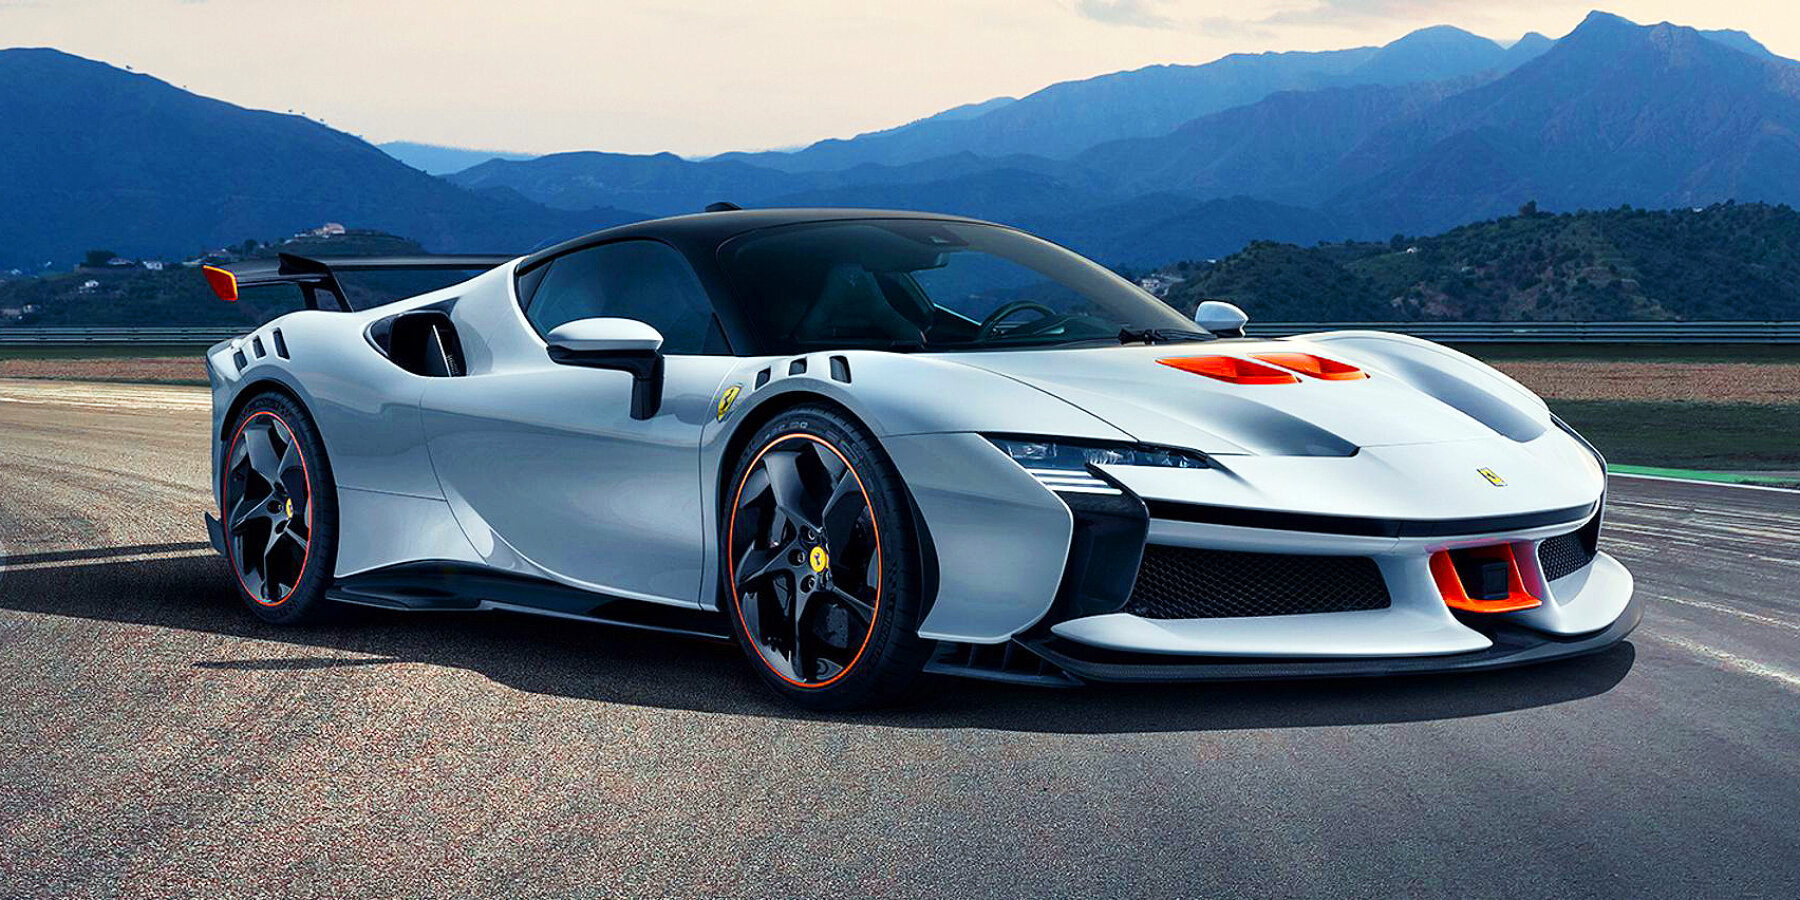 Ferrari goes electric with its most powerful street-legal car ever